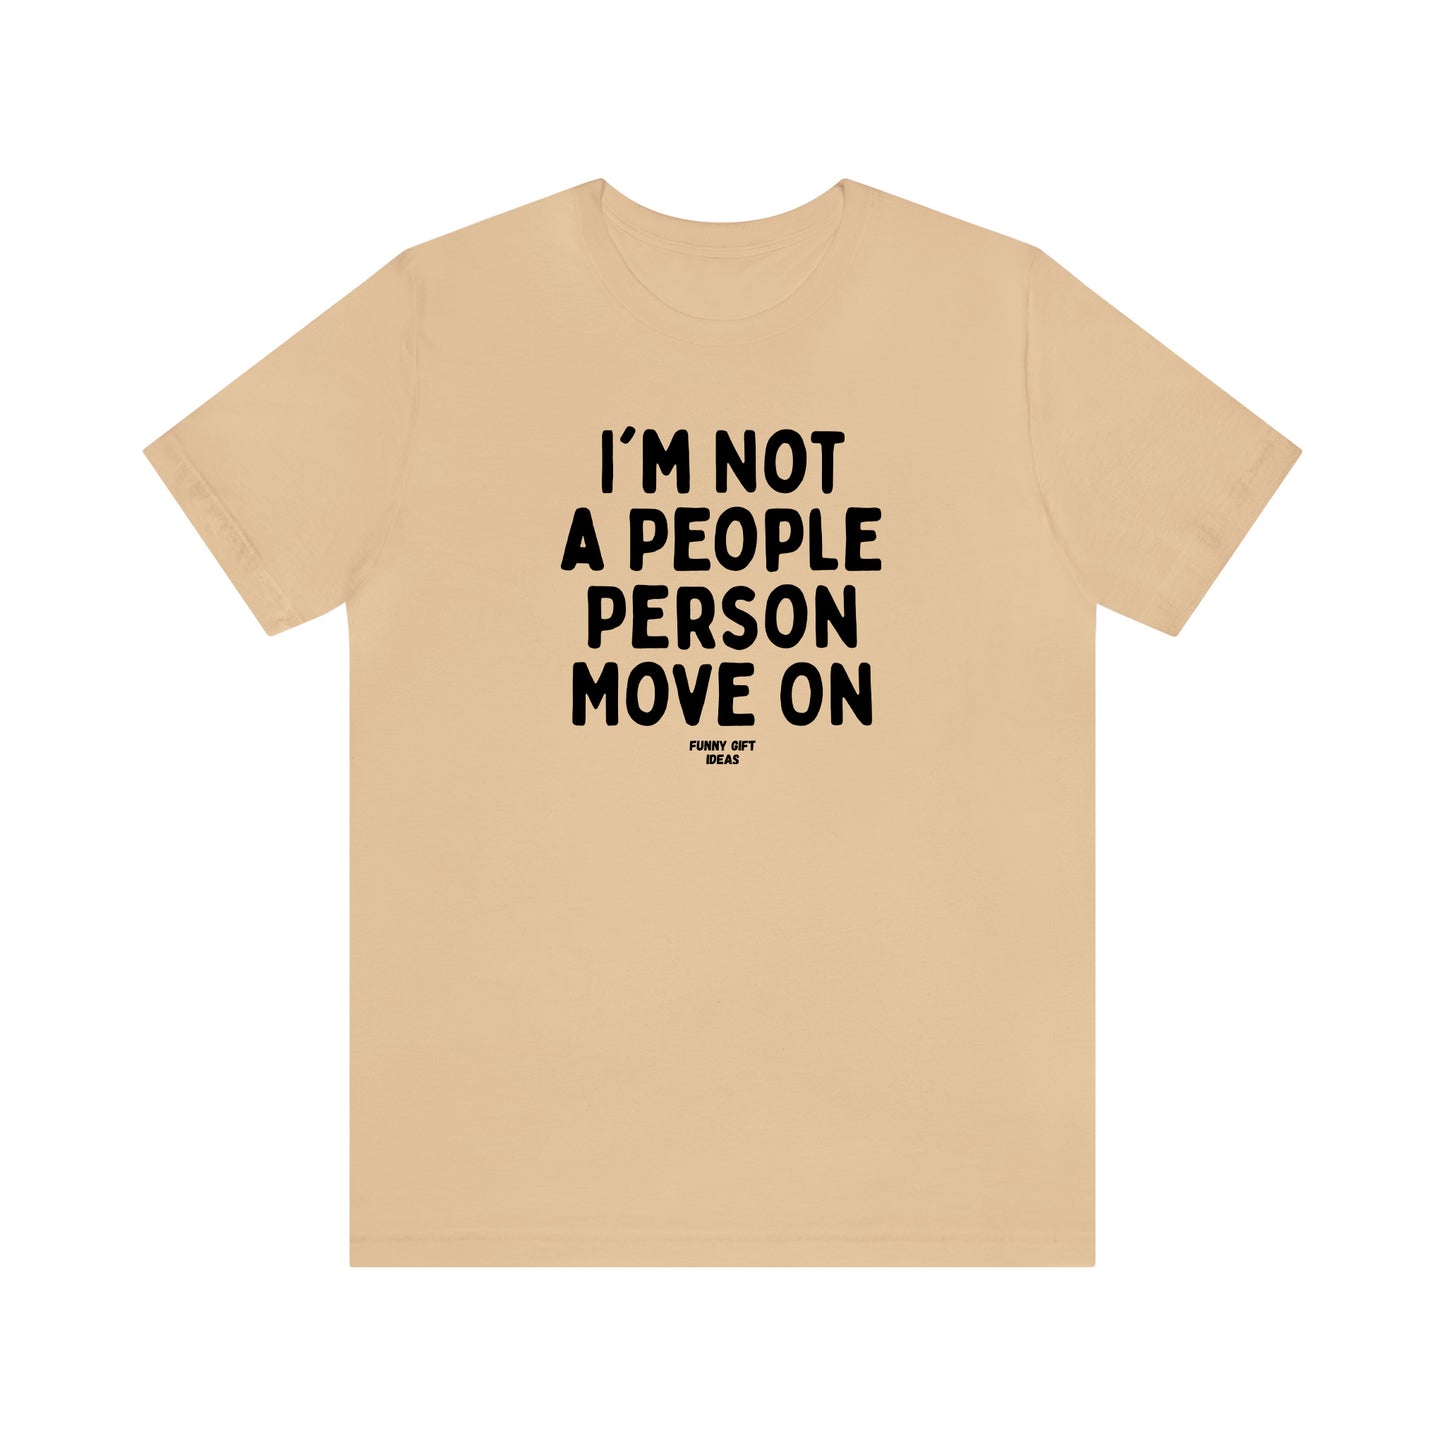 Funny Shirts for Women - I'm Not a People Person Move on - Women's T Shirts